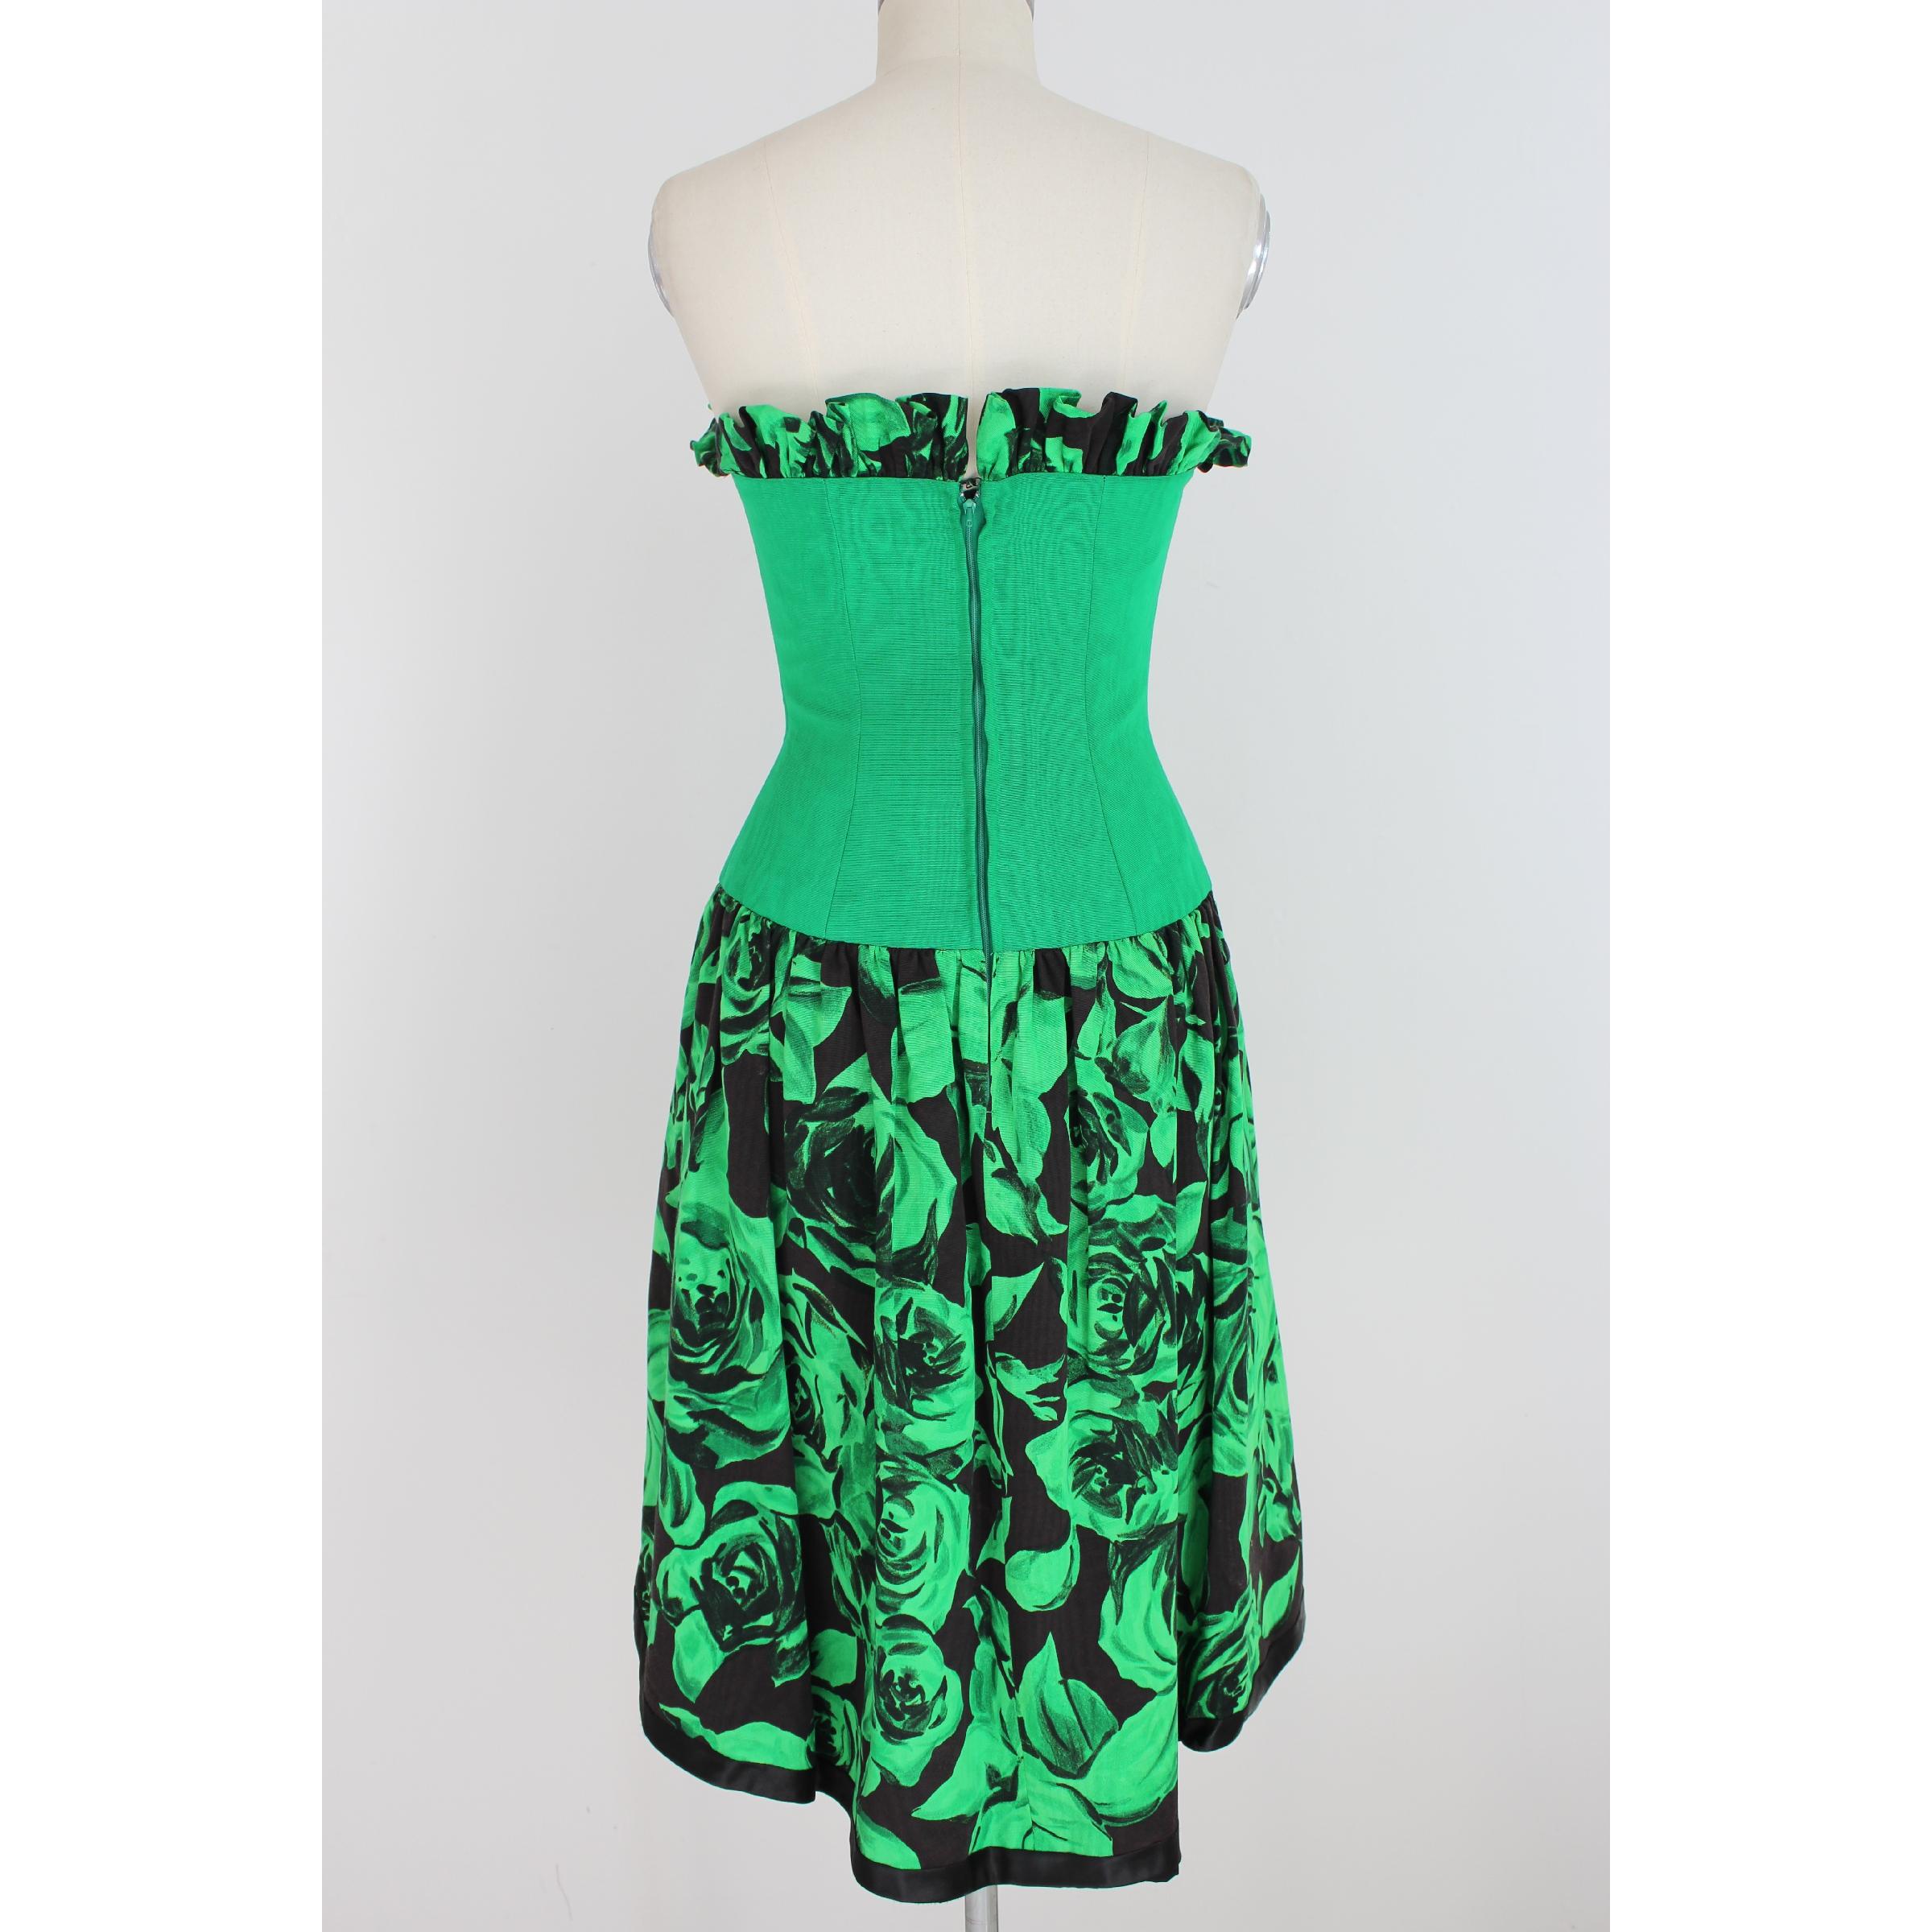 Rossana vintage dress for woman. Green and black color with floral pattern, 100% cotton. Sleeveless, bodice with slats and built-in bra, balloon skirt, portfolio closure, short front long back. 80s. Made in Italy. Excellent vintage